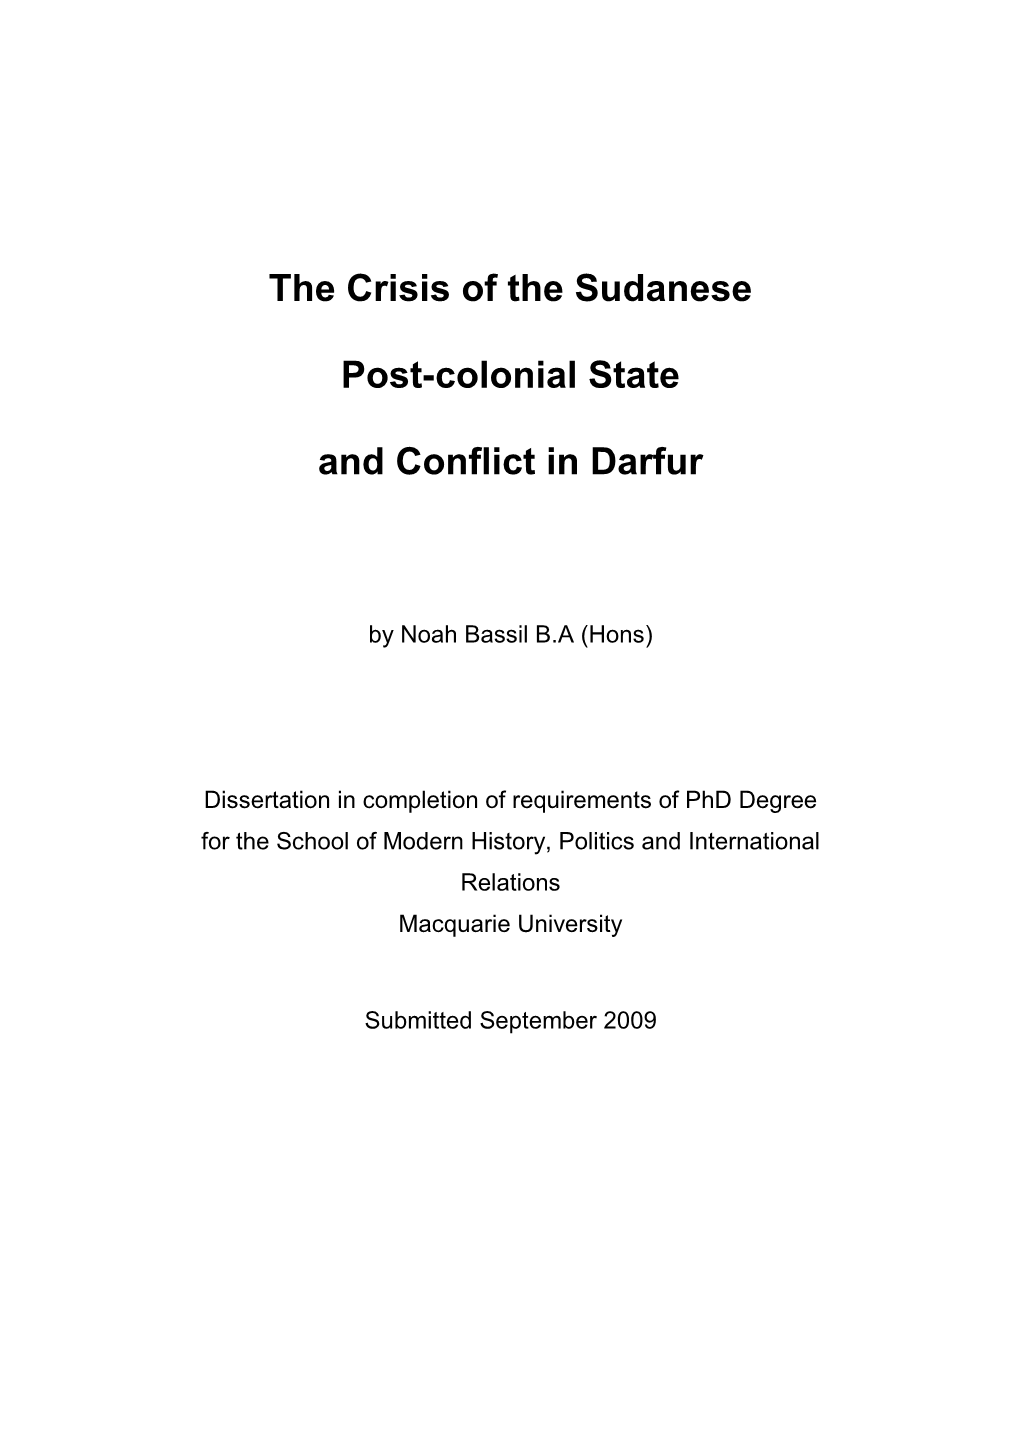 The Crisis of the Sudanese Post-Colonial State and Conflict in Darfur